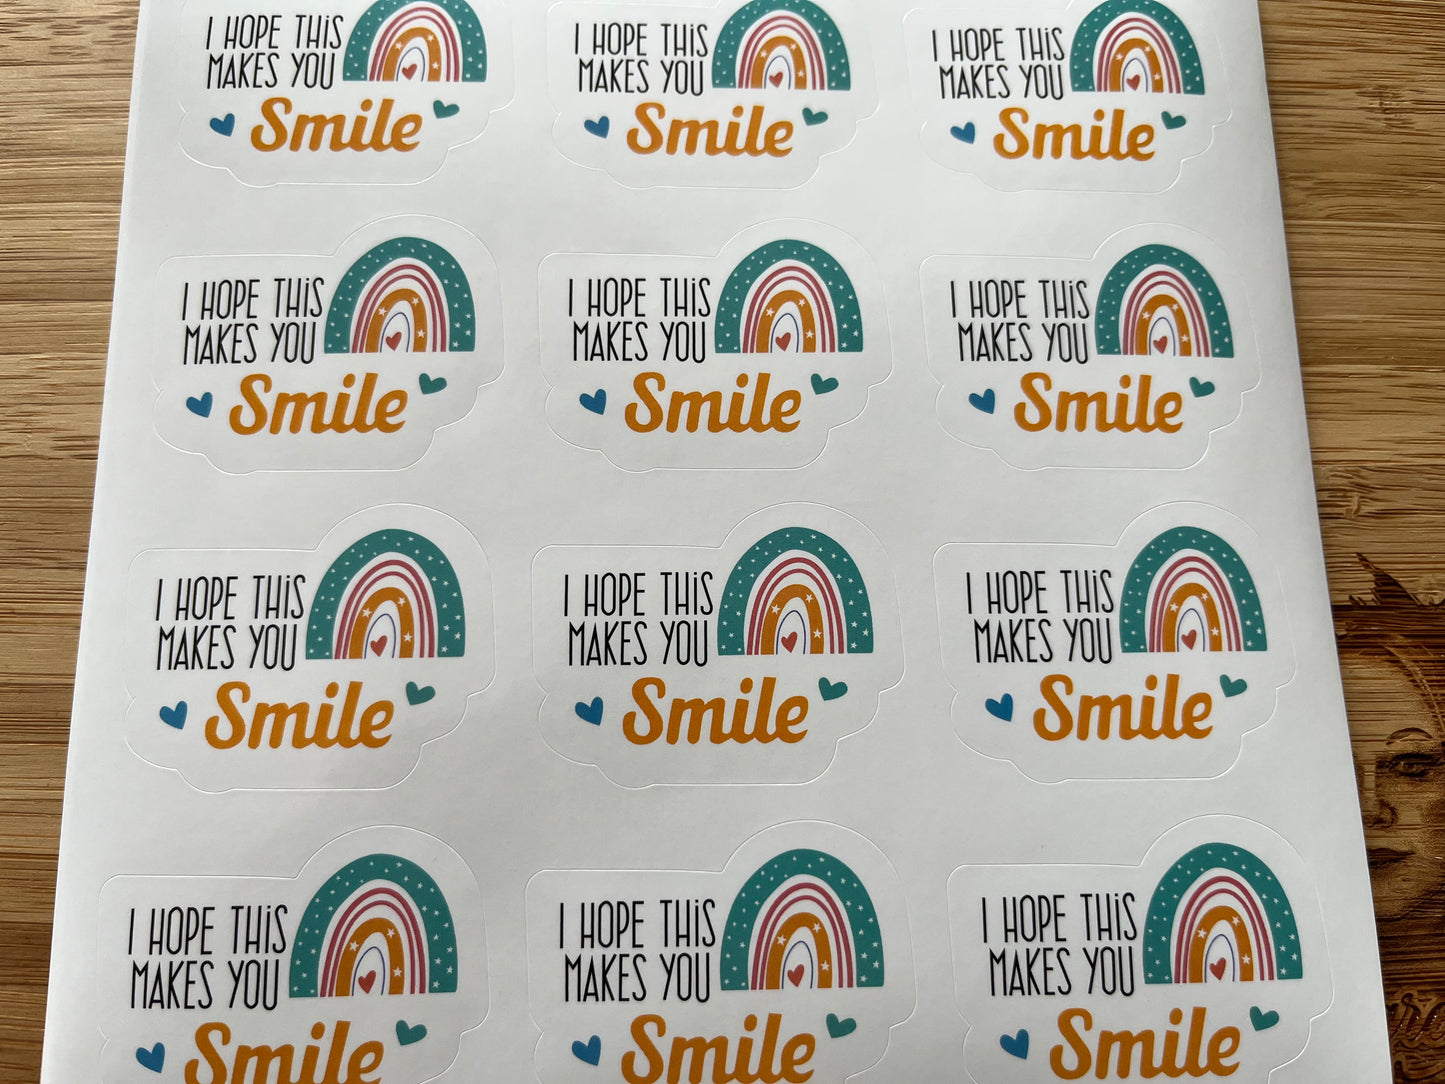 I hope this makes you smile stickers